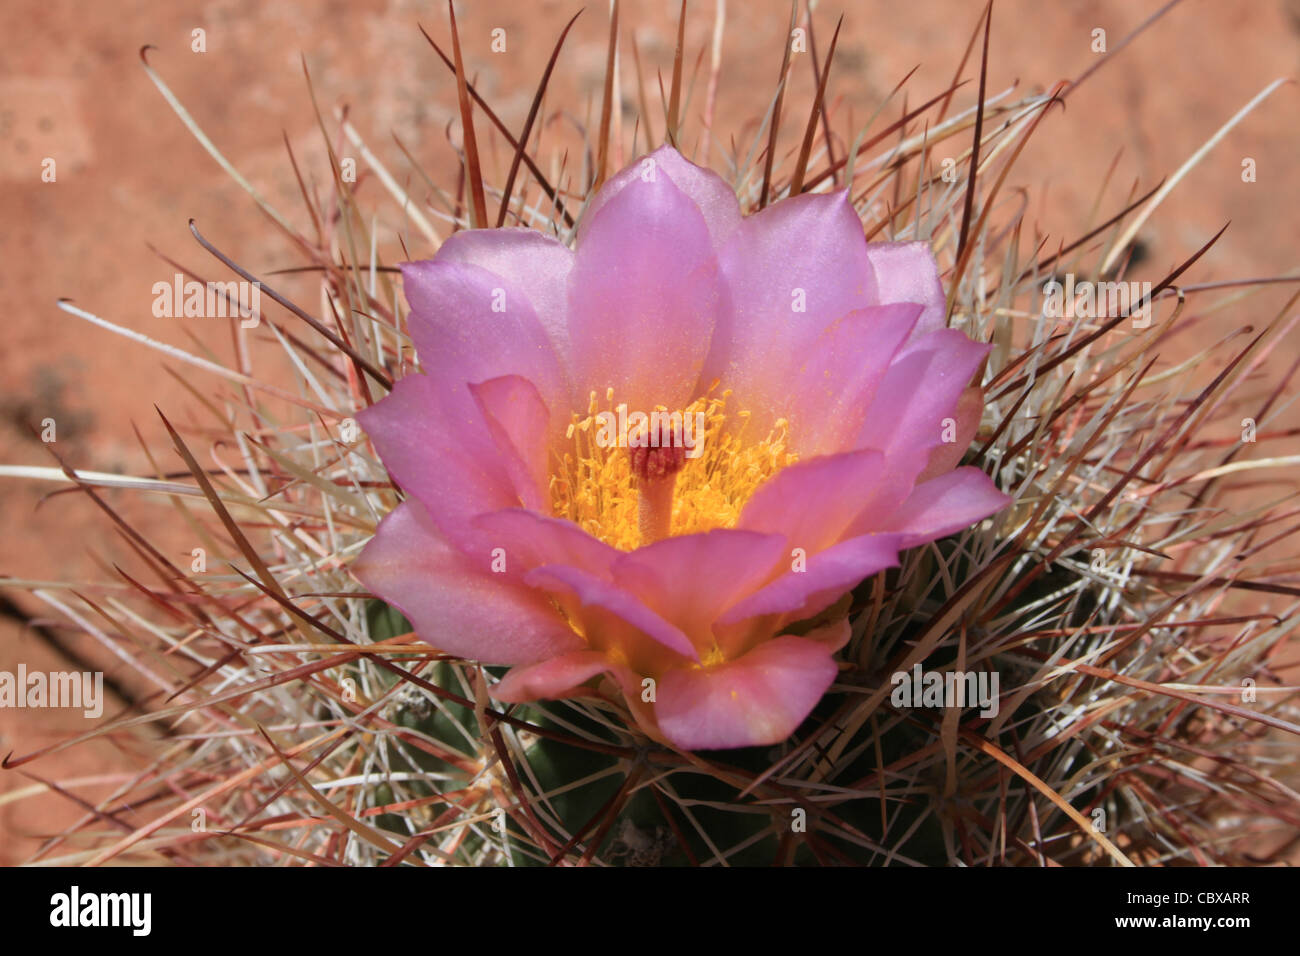 pink barrel cactus flower with yellow pollen Stock Photo